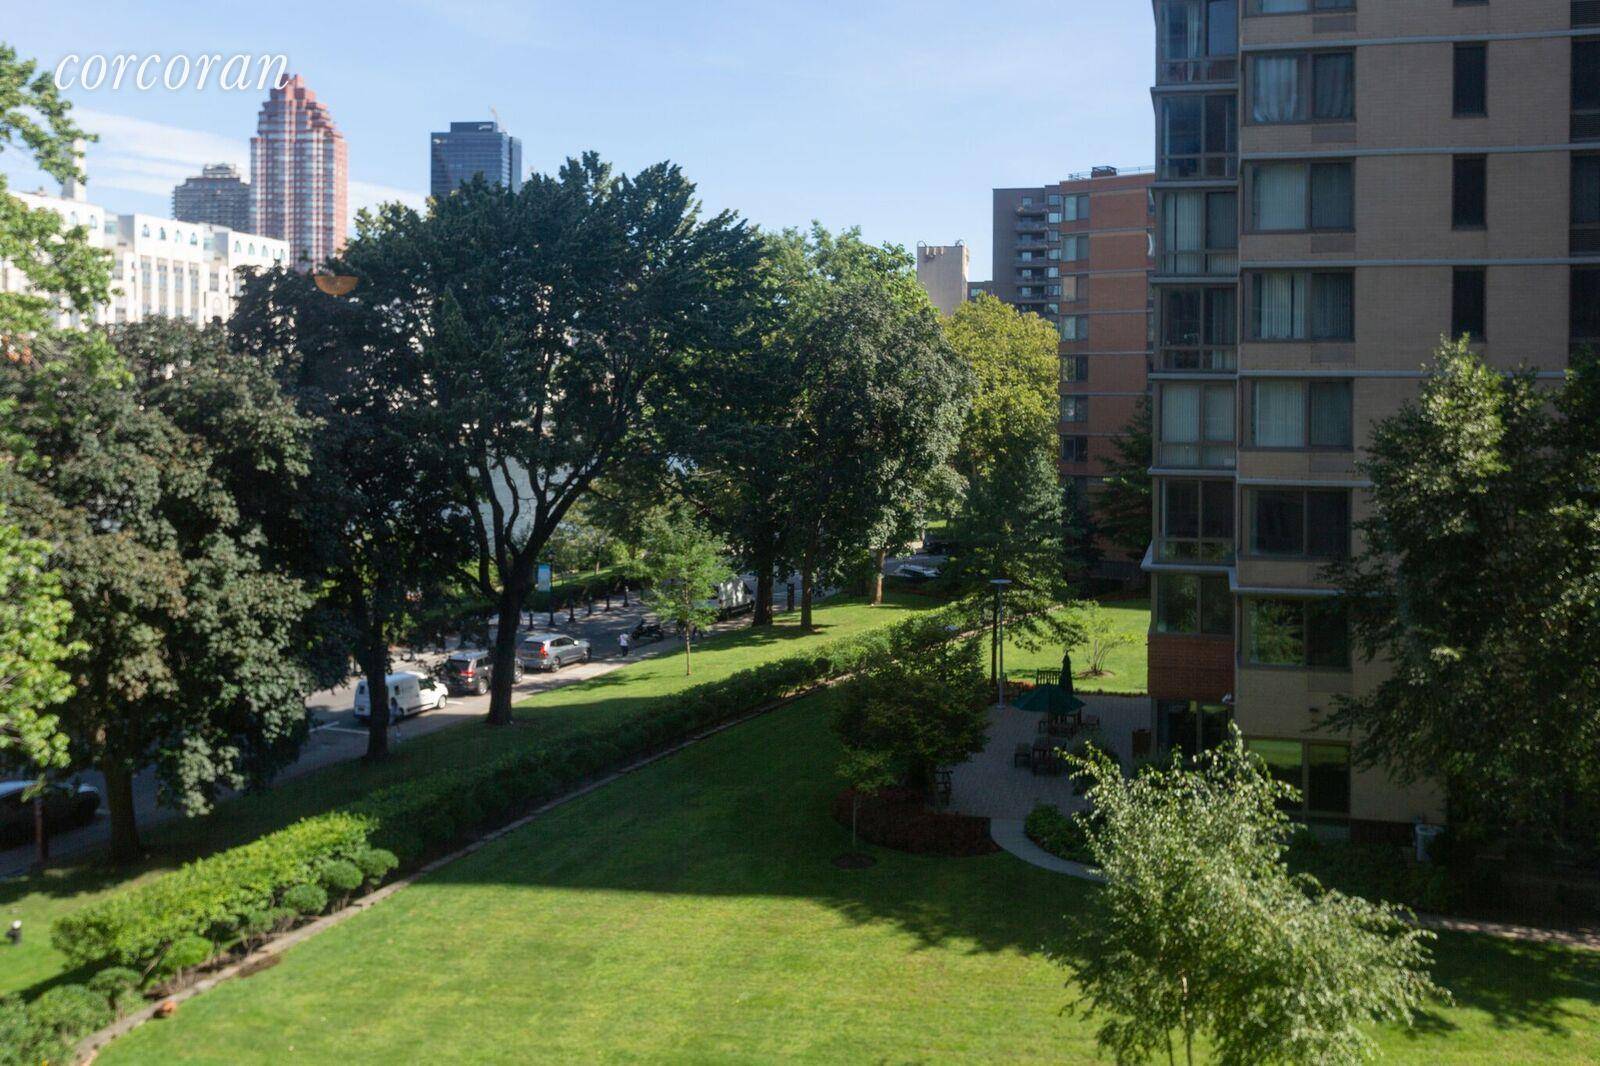 New Massive 1 Bedroom Apartment with Washer Dryer in Unit in one of the Most Desirable Condo Buildings on Roosevelt Island !